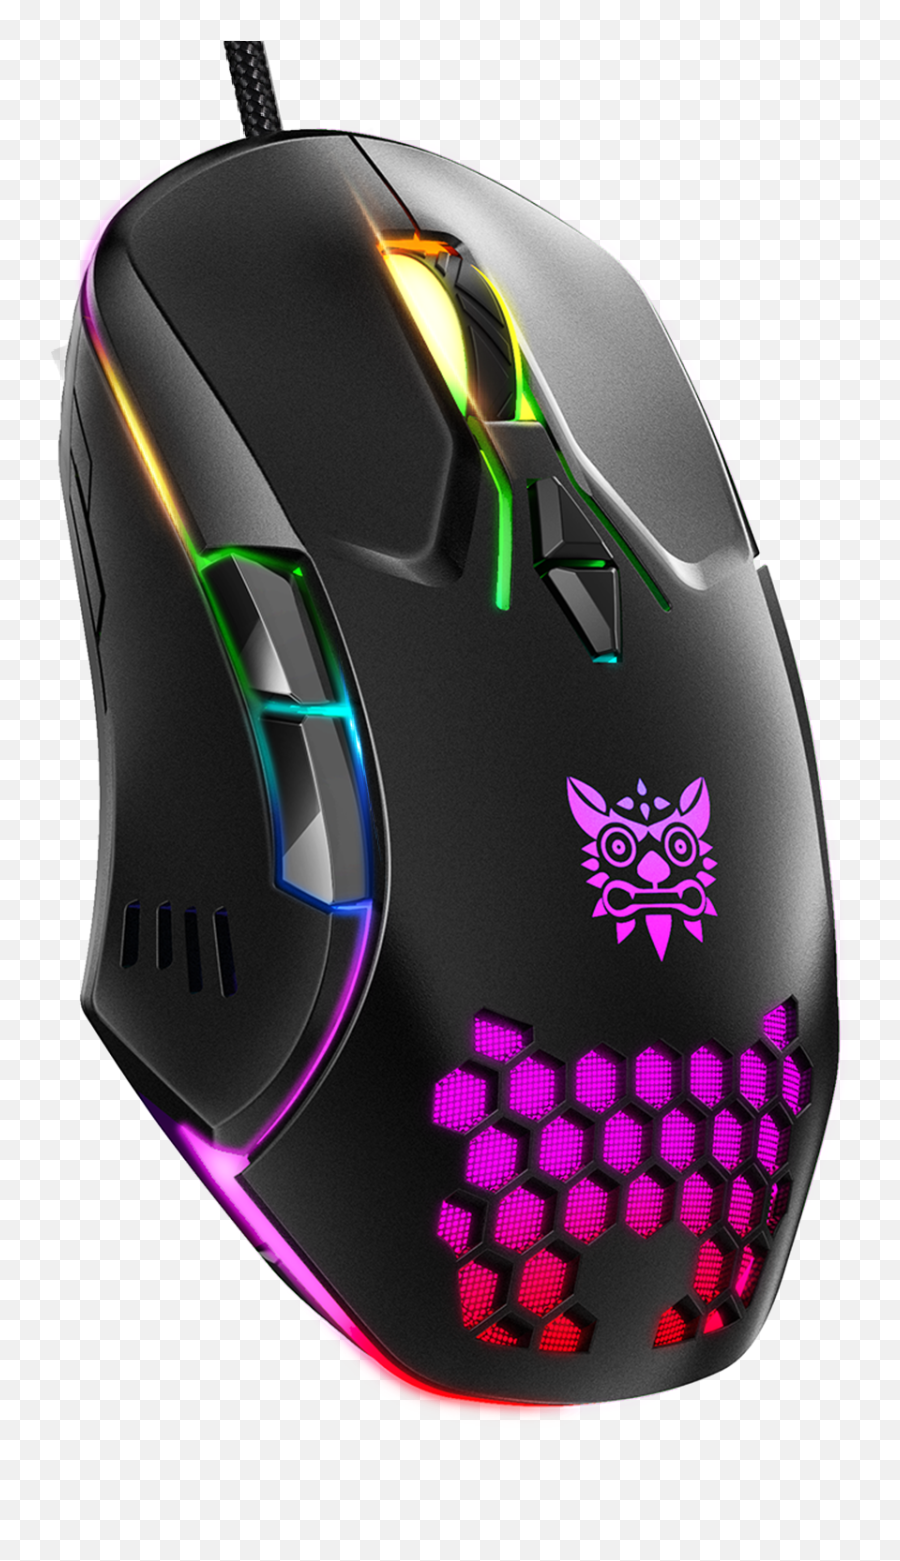 Onikuma Cw902 Wired Gaming Mouse Rgb Optical Mause With Colorful Lighting Pc Laptop Adjustable Dpi Mechanical - Onikuma Cw902 Png,Pubg Honeycomb Icon